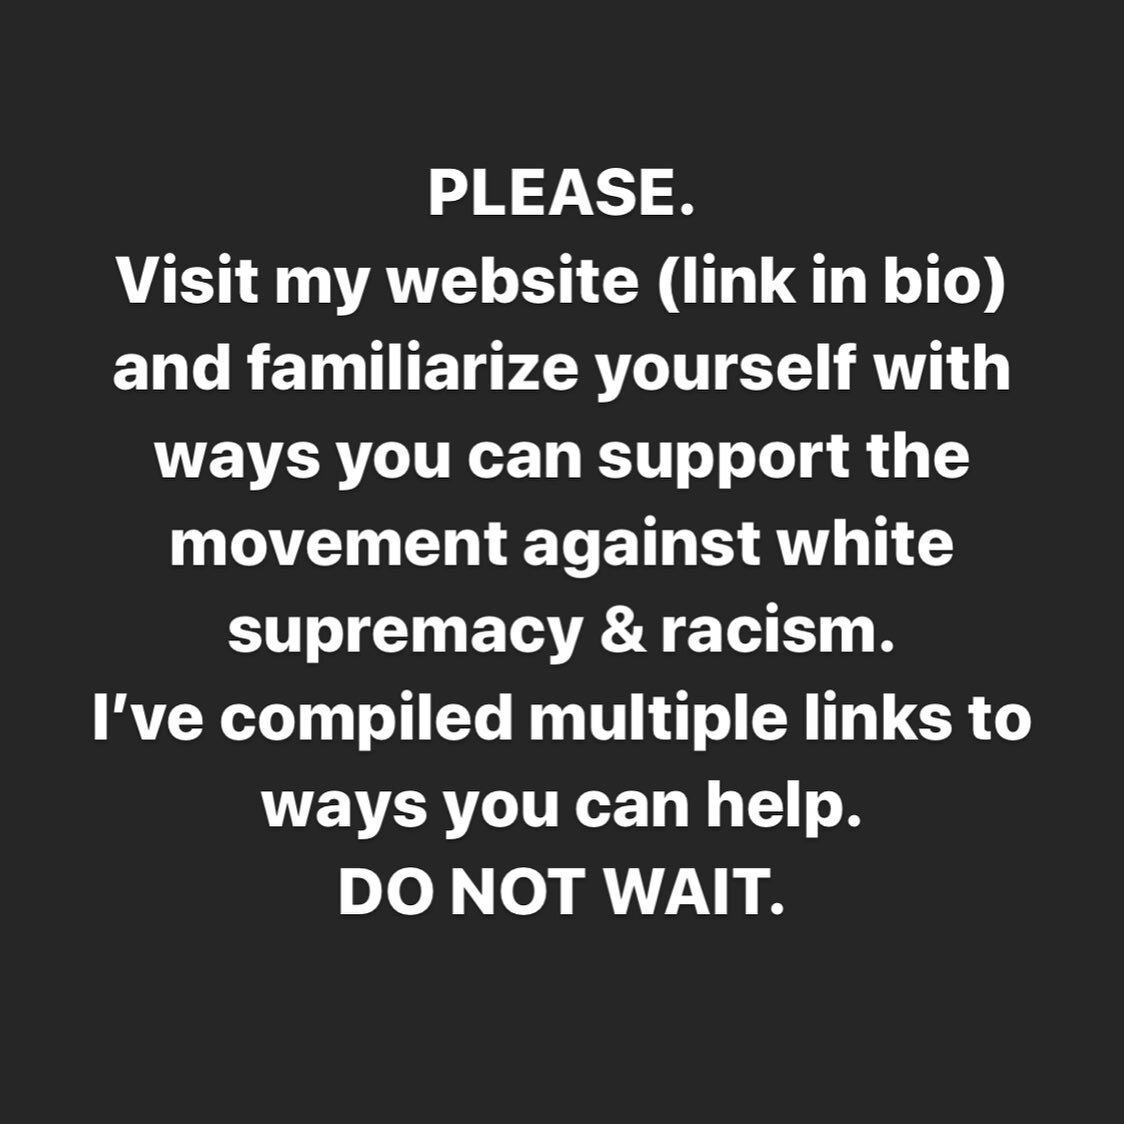 www.benbocko.com &lt;&bull;&bull;&bull; I&rsquo;ve compiled multiple links to ways you can help the movement against racism &amp; white supremacy.

The time is now to make these changes that have been overlooked for far too long. Reflect. Research. S